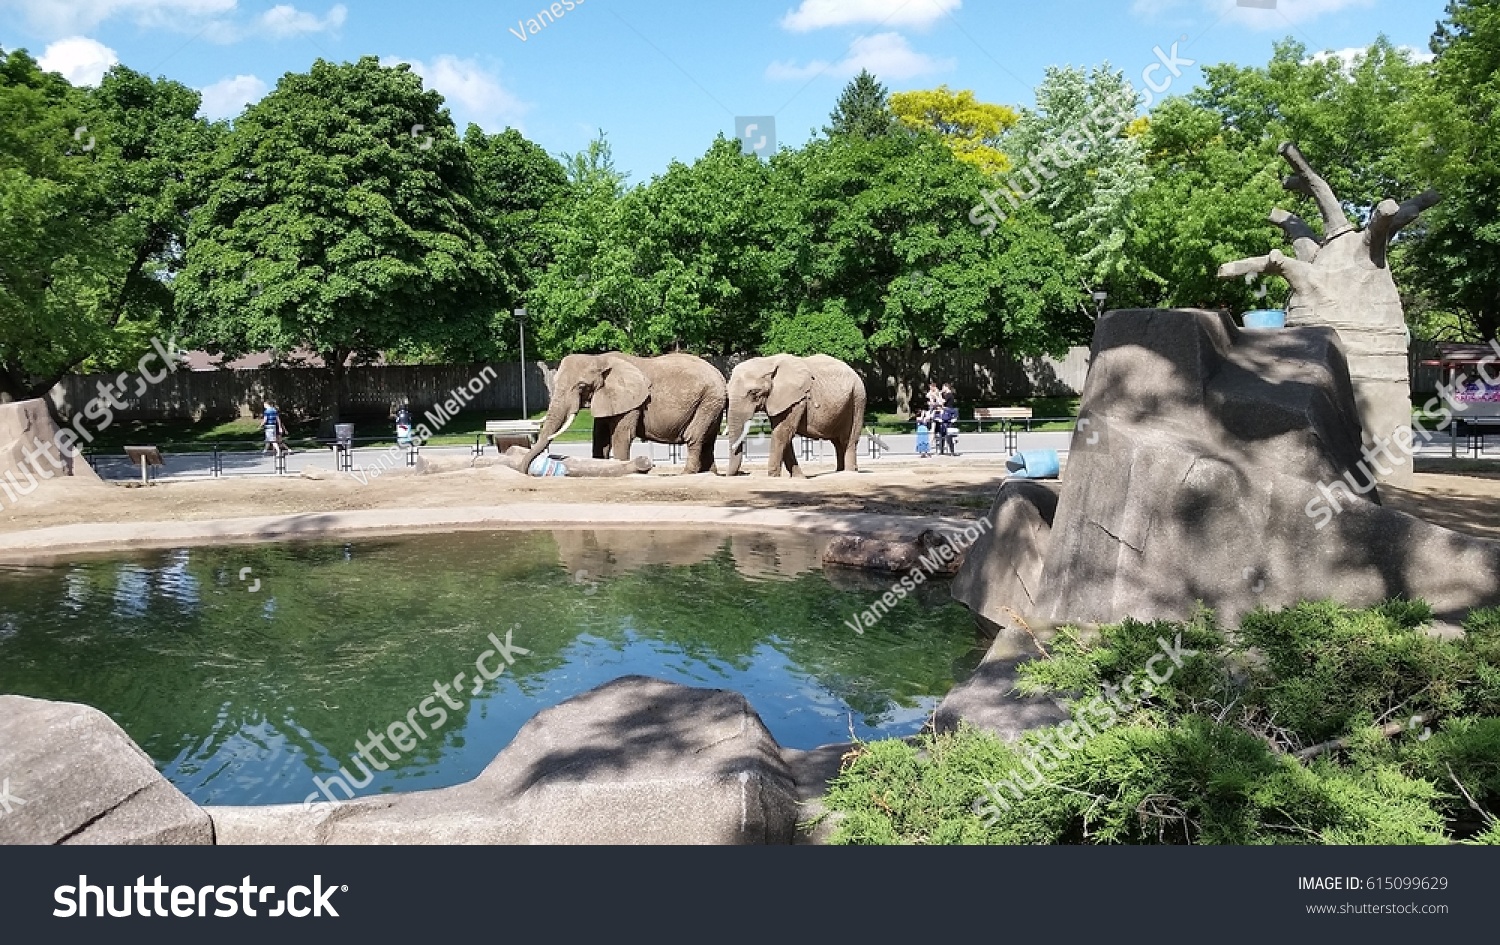 Two Playful Elephants in a zoo #615099629